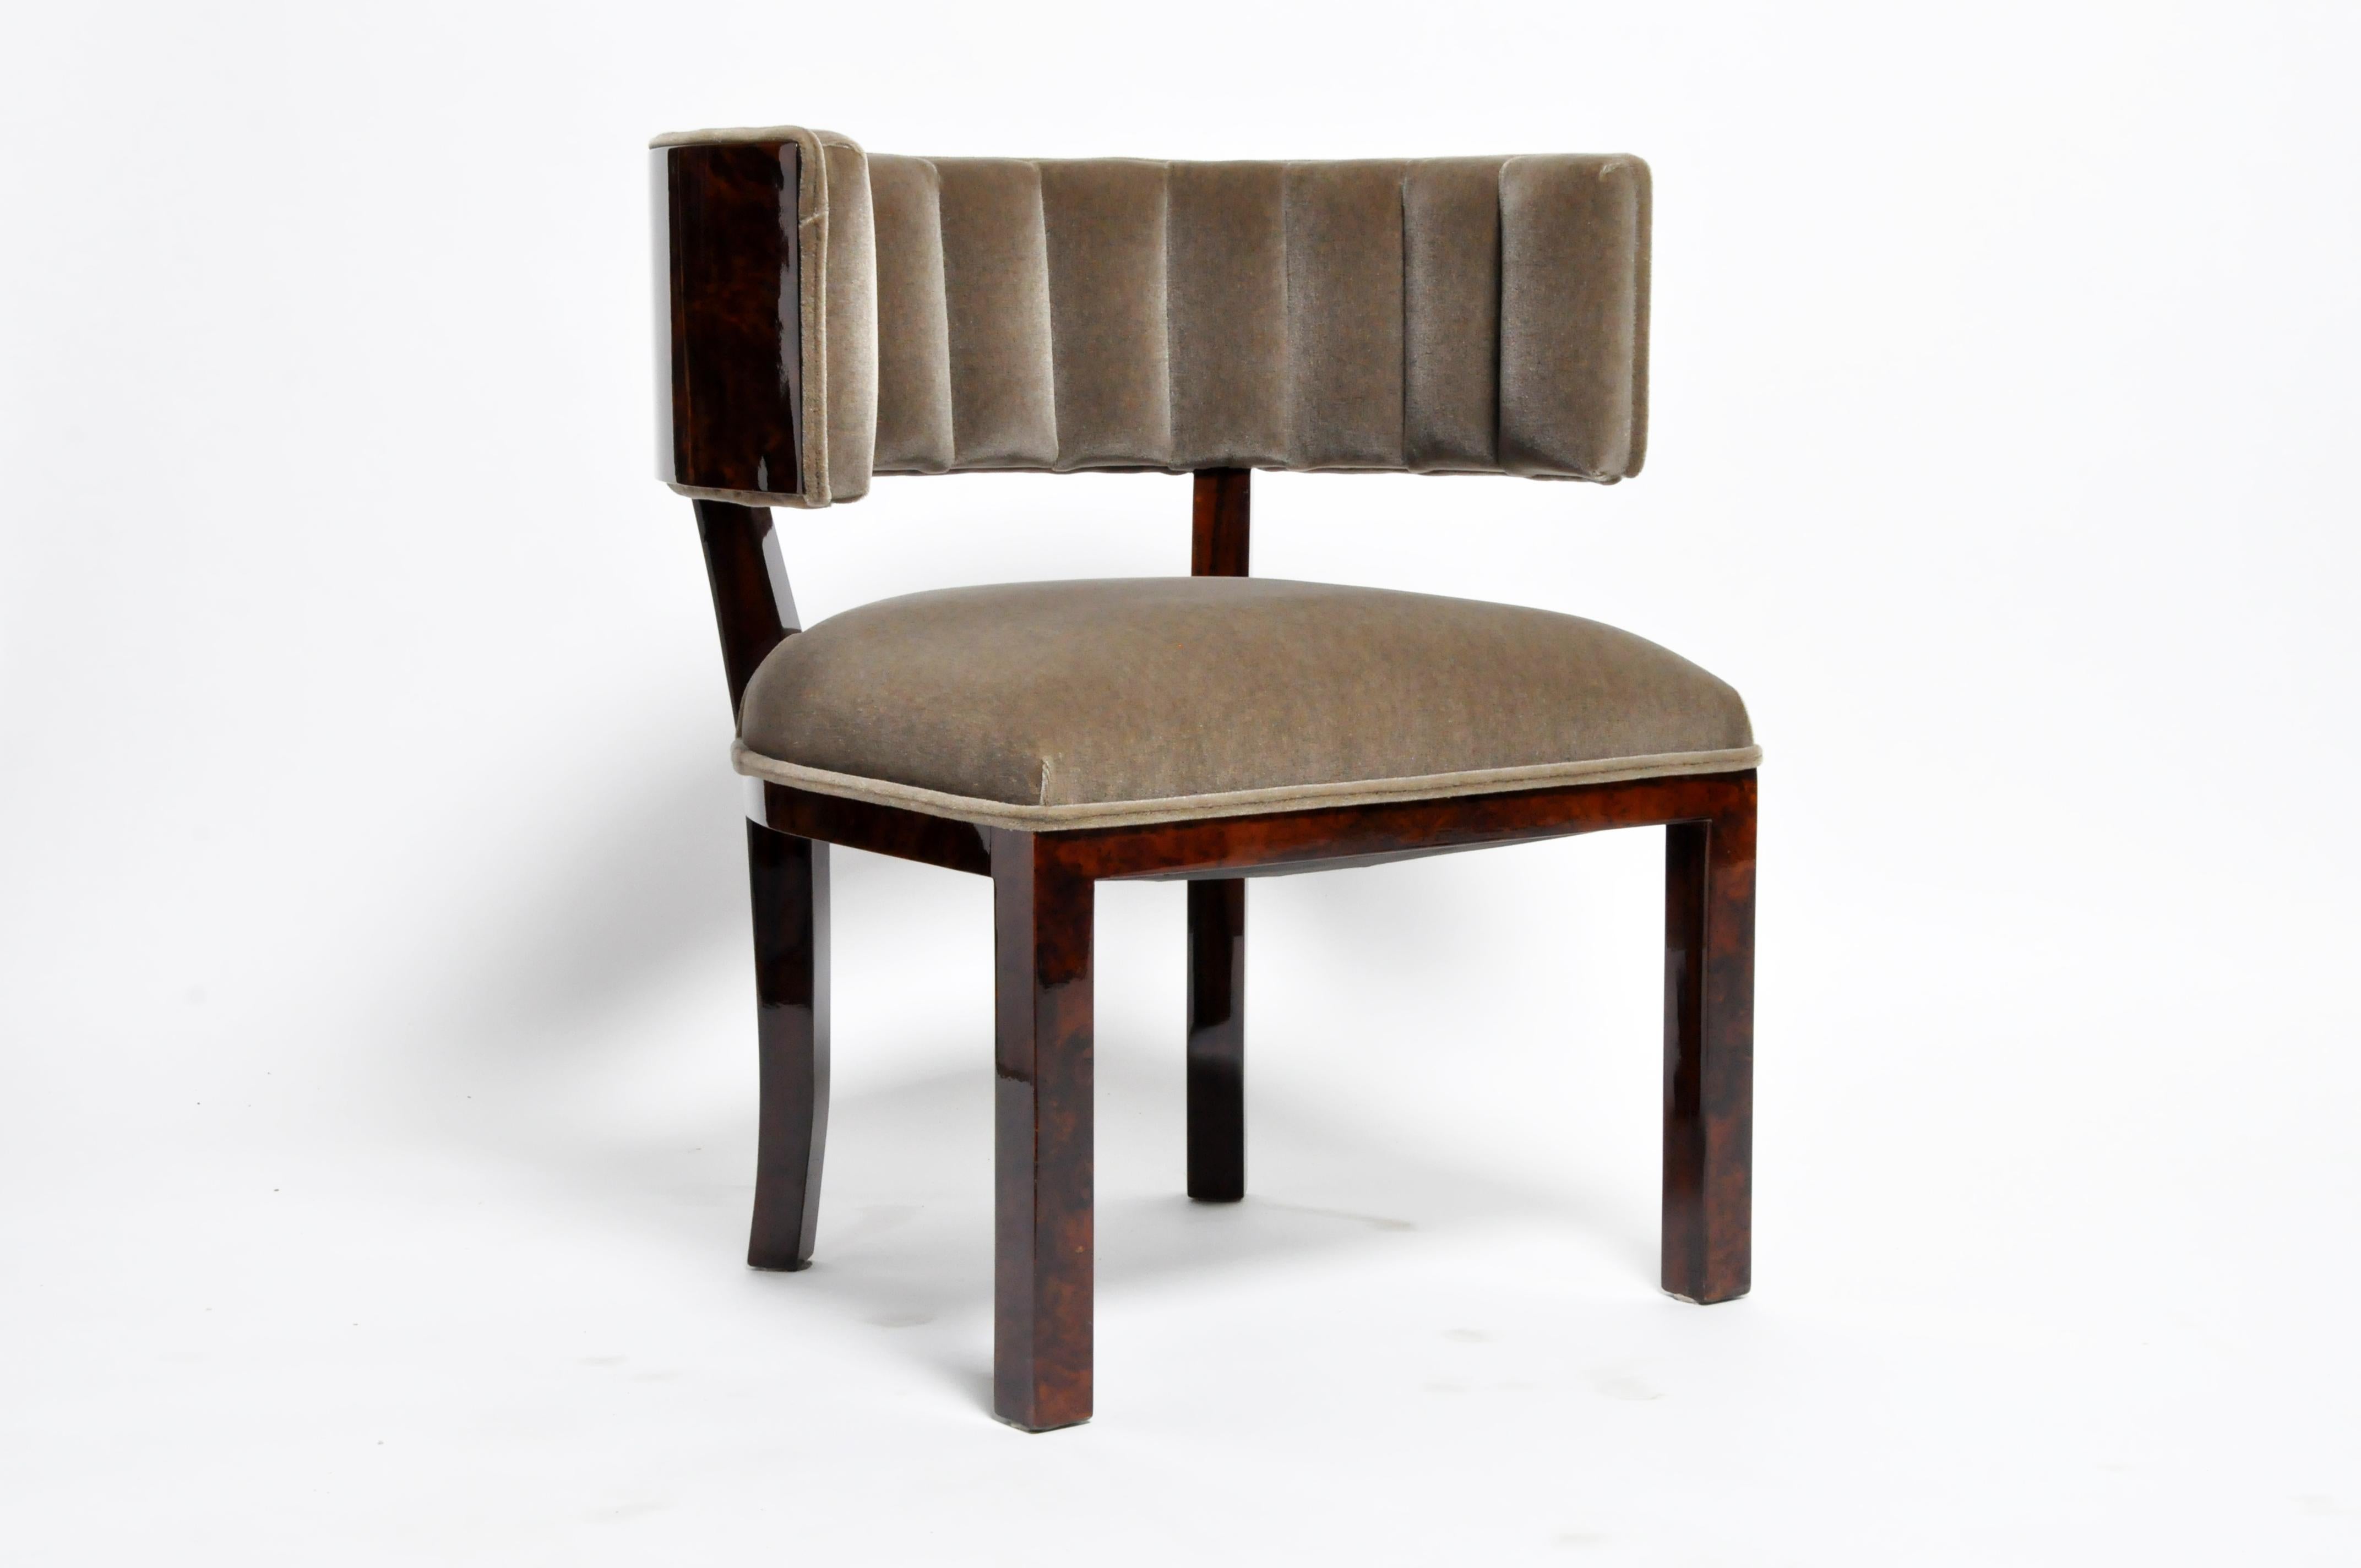 This luxurious klismos chair exudes modernist refinement. Burled walnut veneer is offset by a smooth, tufted upholstery. The juxtaposition of plush materials and stream-lined form signifies the modernist's reverence for both comfort and opulence.